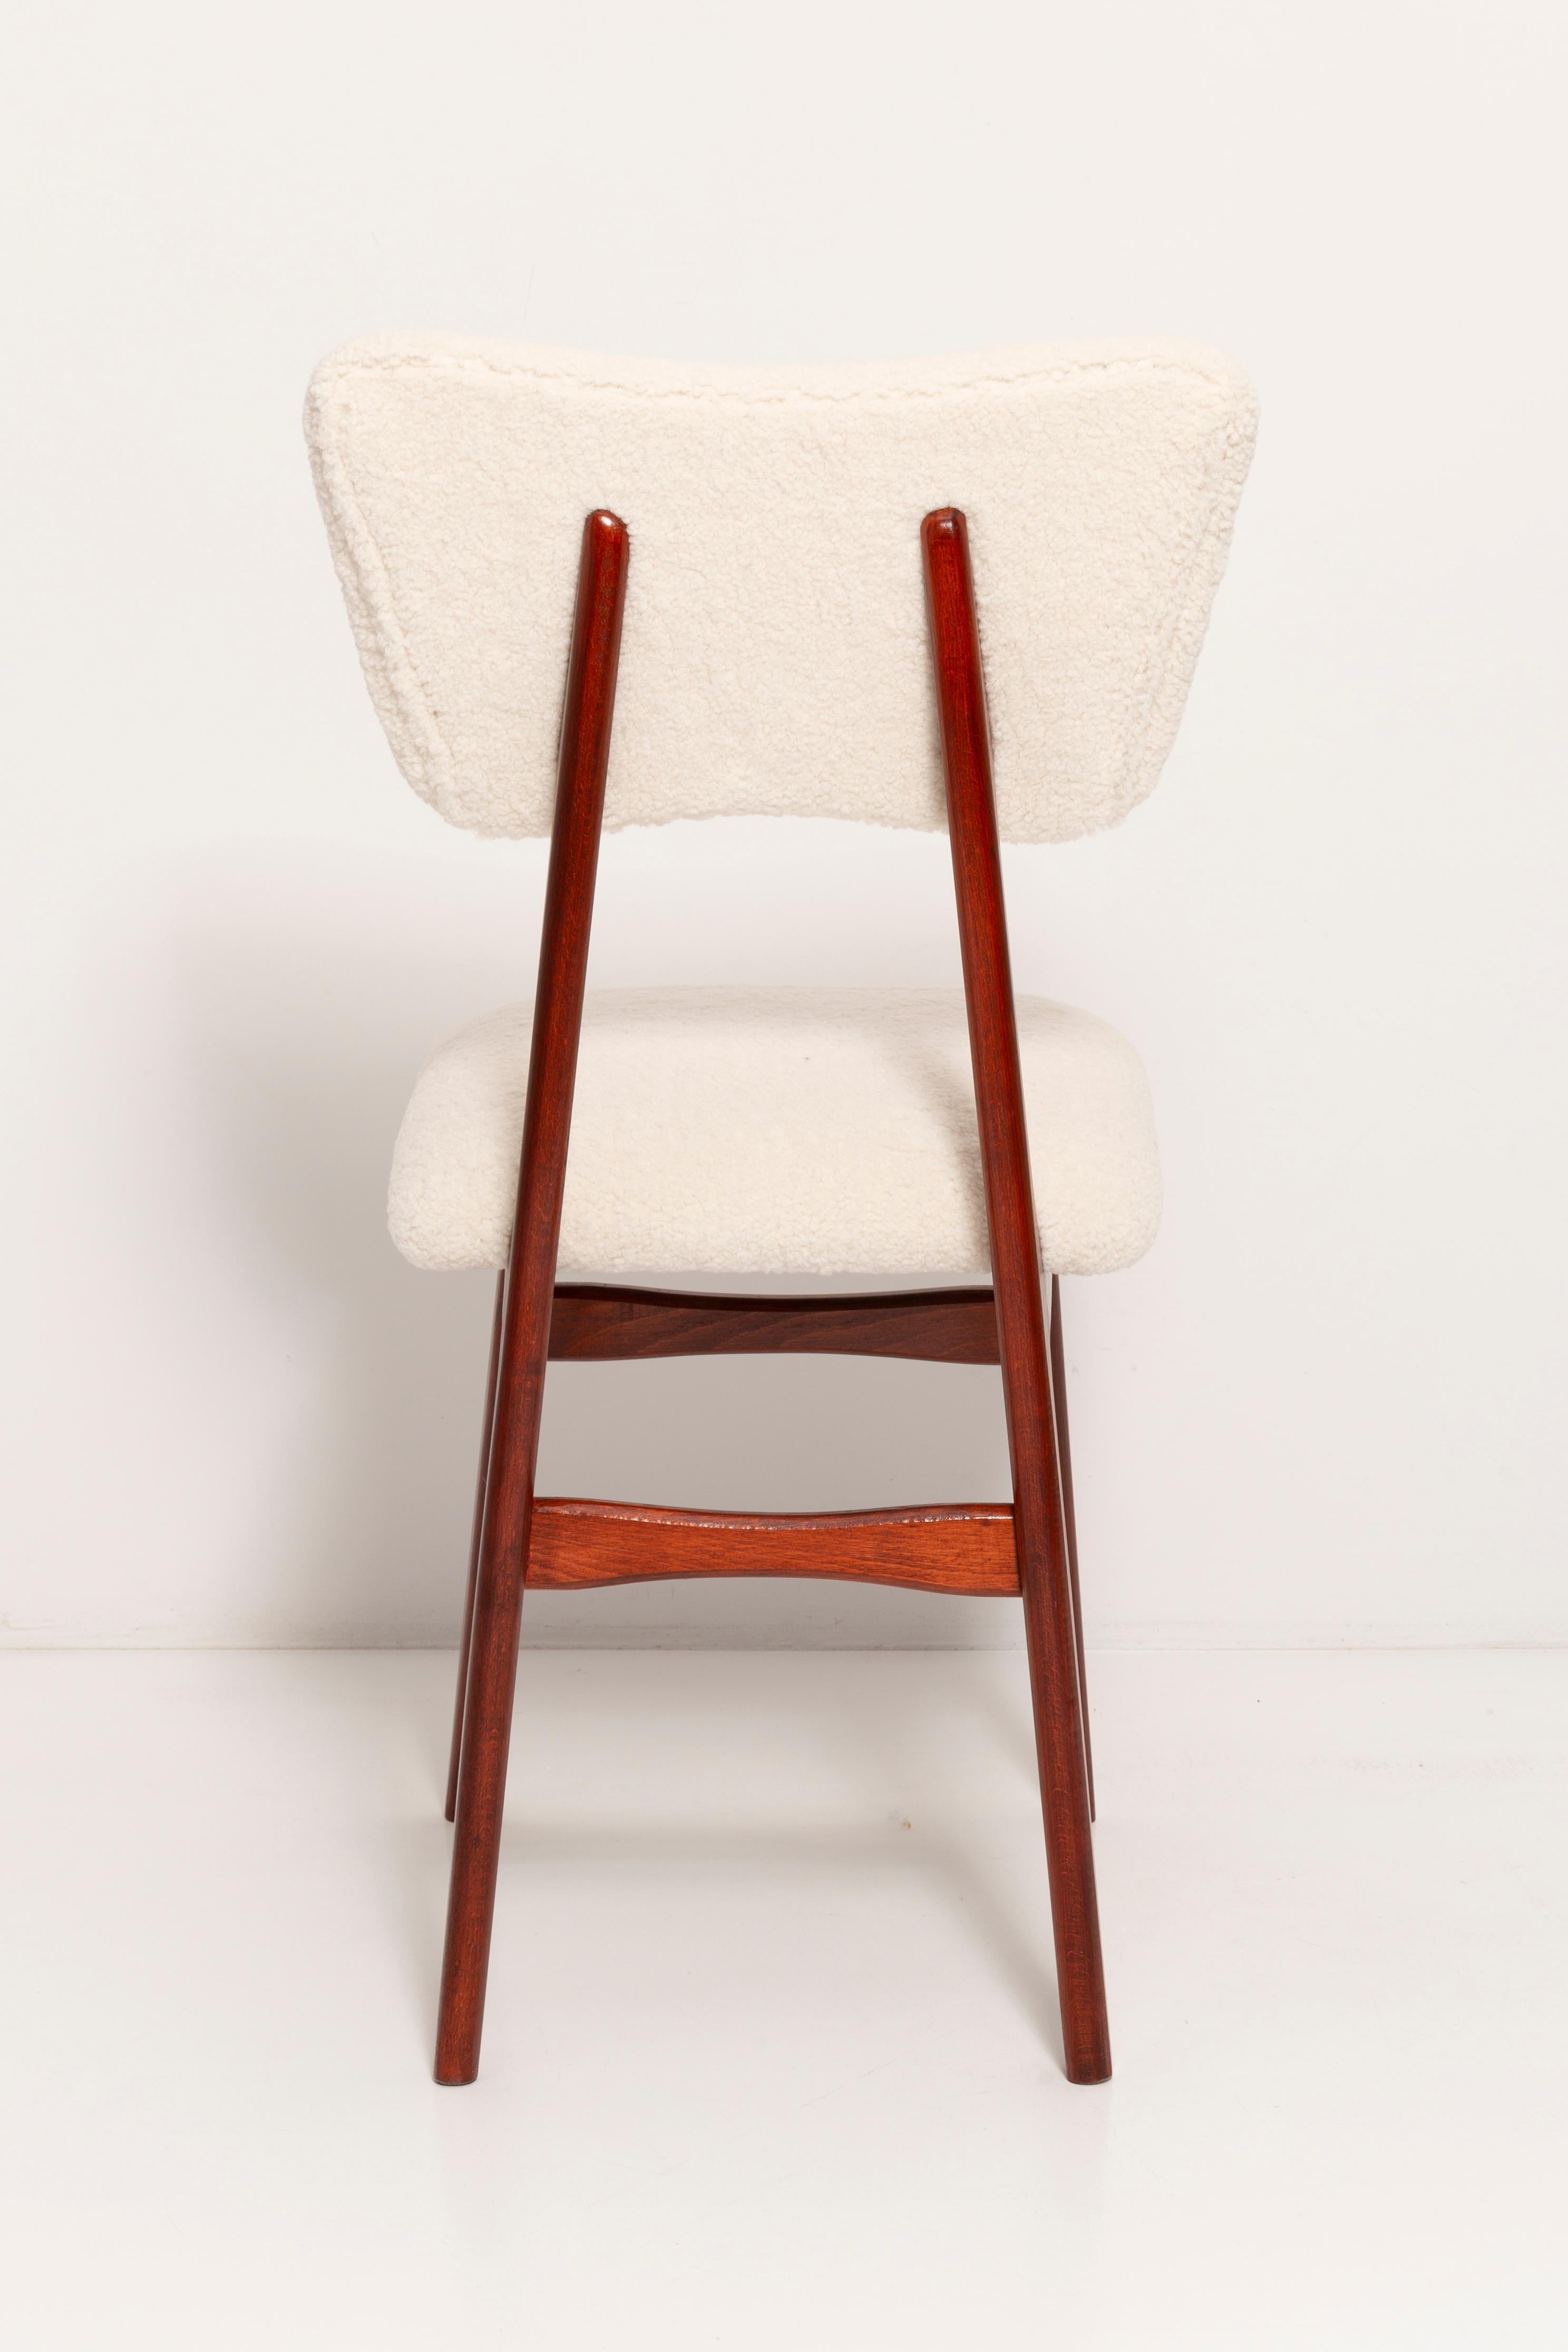 Twelve 20th Century Cream Boucle and Cherry Wood Butterfly Chairs, 1960s, Europe For Sale 5